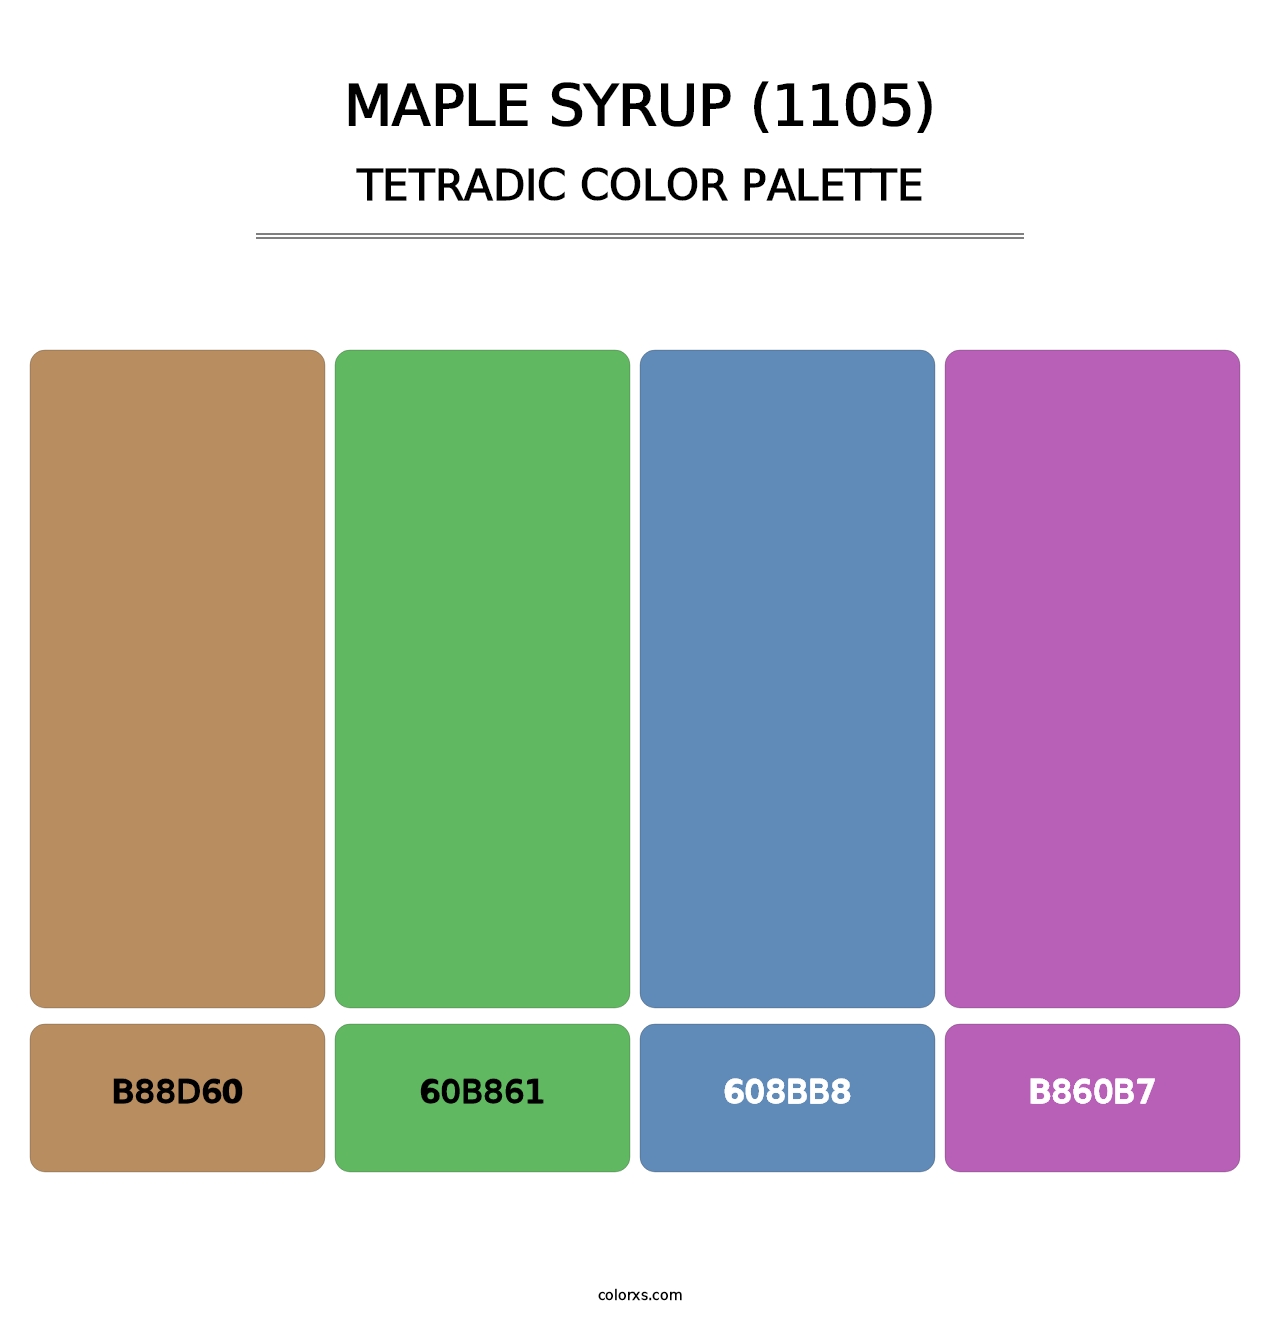 Maple Syrup (1105) - Tetradic Color Palette